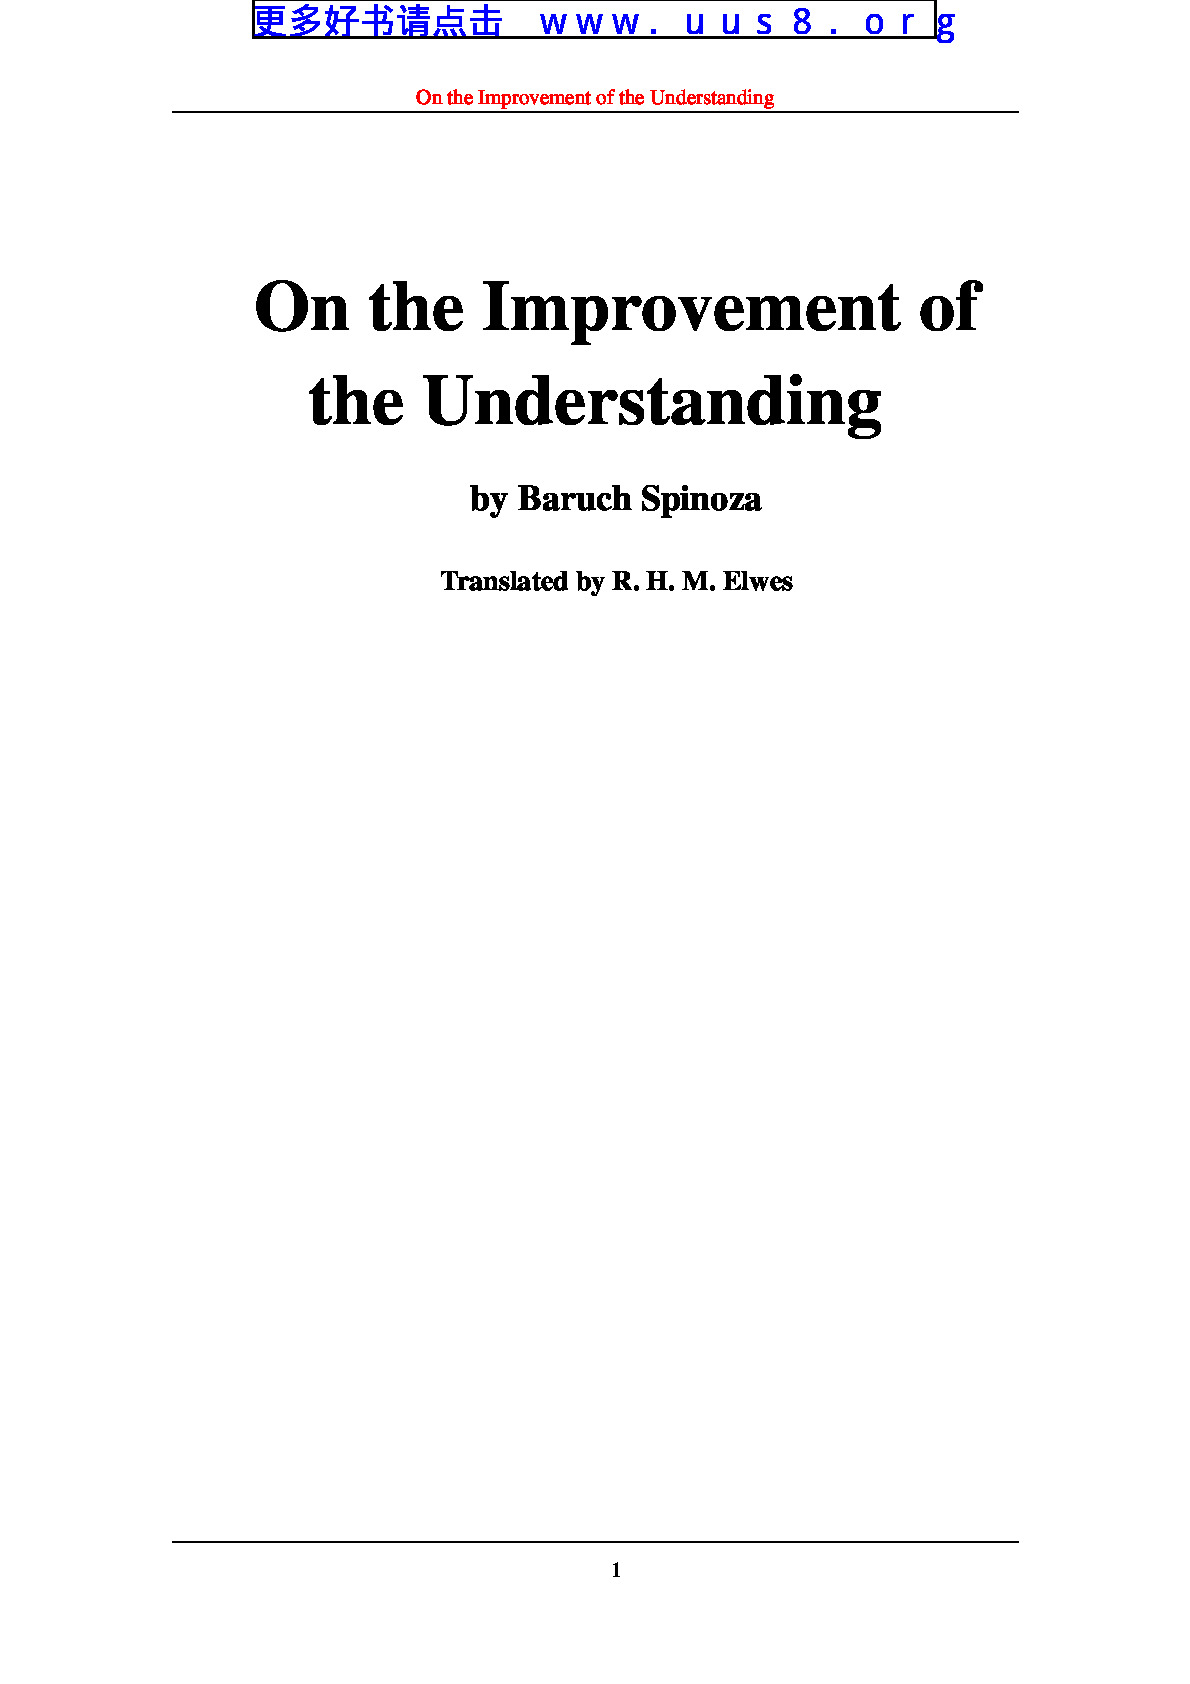 On_the_Improvement_of_the_Understanding(提高阅读能力) – 副本